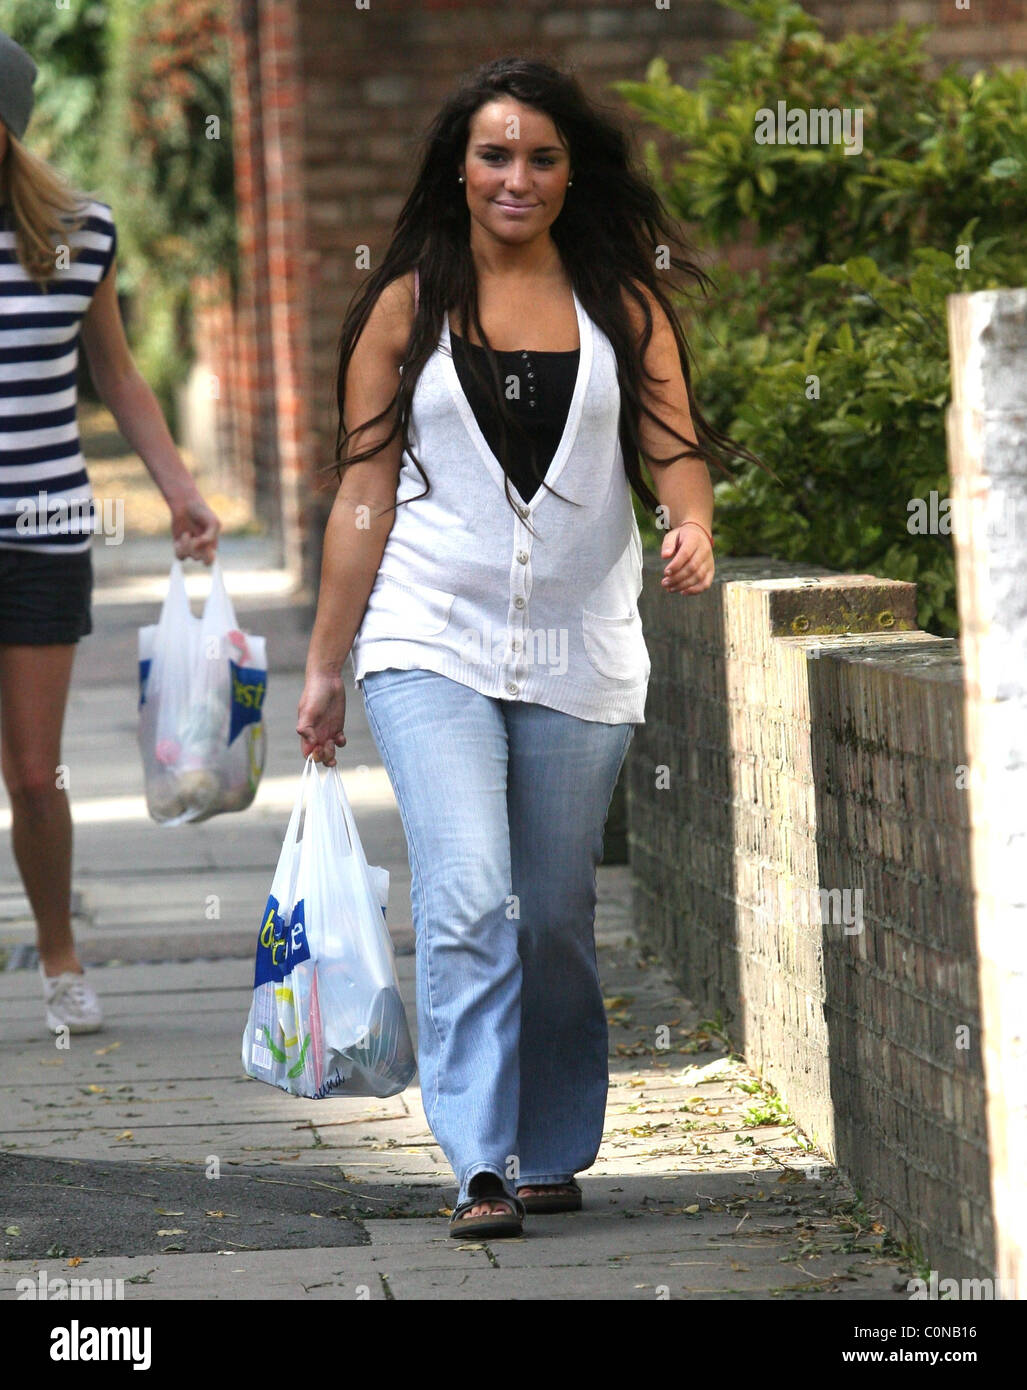 Laura White returns to the X Factor house with some shopping London, England - 06.10.08 Stock Photo